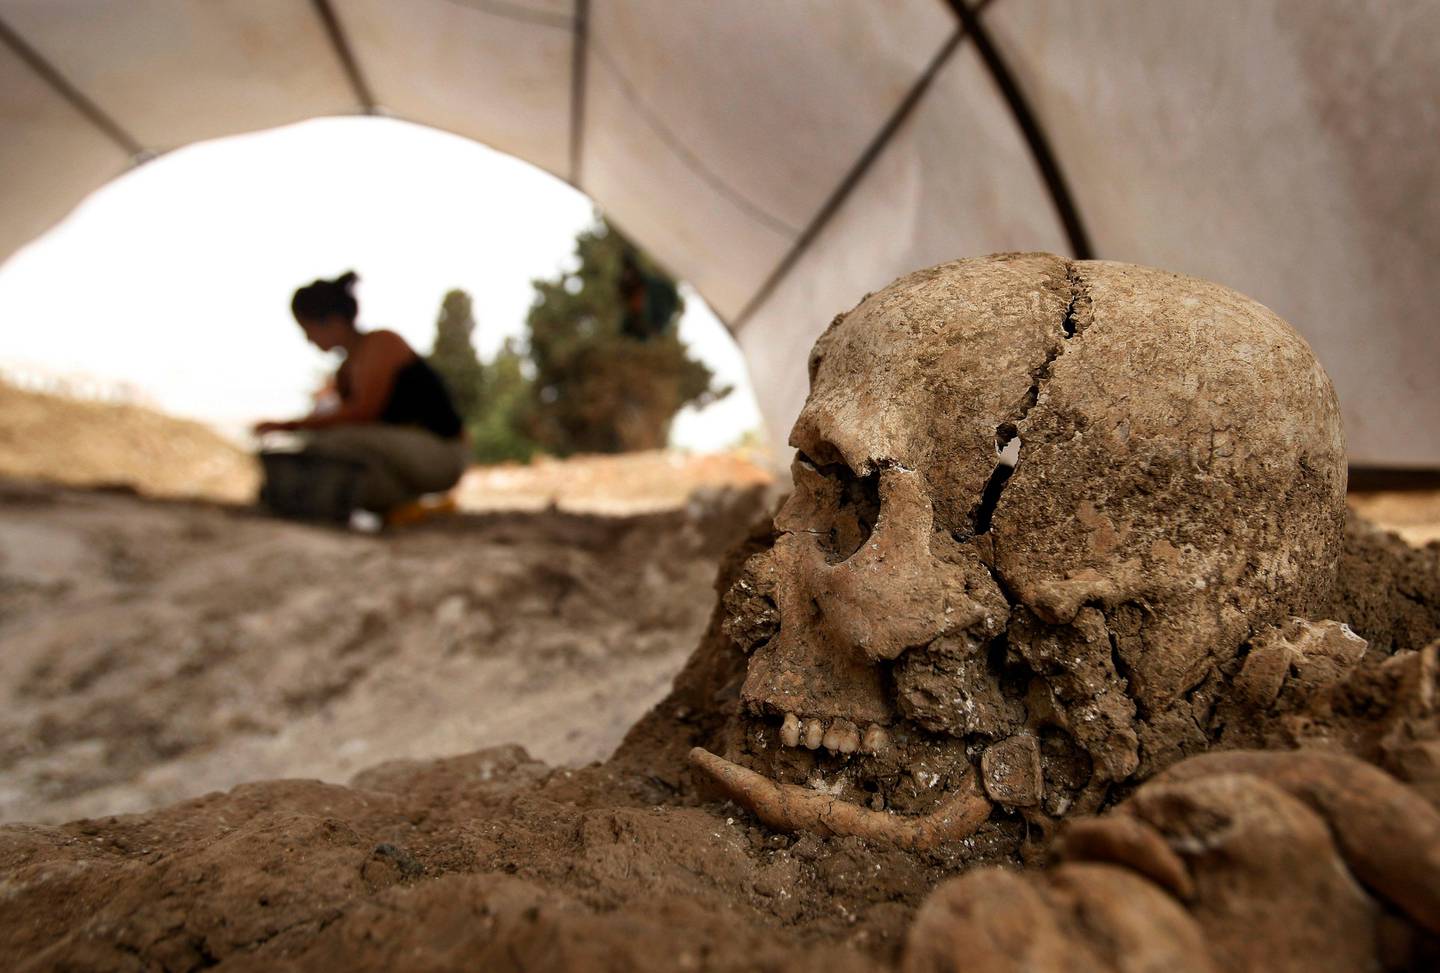 A worker is seen behind a human skull in a mass grave in San Rafael cemetery in Malaga, Spain, Sunday, Sept. 21, 2008. At the start of the 1936-39 war, Malaga became one of many execution grounds for perceived opponents of Francisco Franco, the army general who unleashed the conflict by rising up against the elected, leftist Republican government. One of them was perhaps the war's most famous victim, Federico Garcia Lorca, widely considered Spain's best 20th century poet and playwright. Garcia Lorca, was shot along with a school teacher named Dioscoro Galindo Gonzalez and two labor union activists , Francisco Galadi and Juan Arcolla on Aug. 18, 1936 in nearby Viznar. For years, the poet's descendants blocked requests by the Galindo and Galadi families to open up the grave. Tired of waiting, Galindo and Galadi relatives took their case to crusading investigative magistrate Baltasar Garzon, who had recently begun a probe into what are essentially Spain's missing ones.(AP Photo/Sergio Torres)